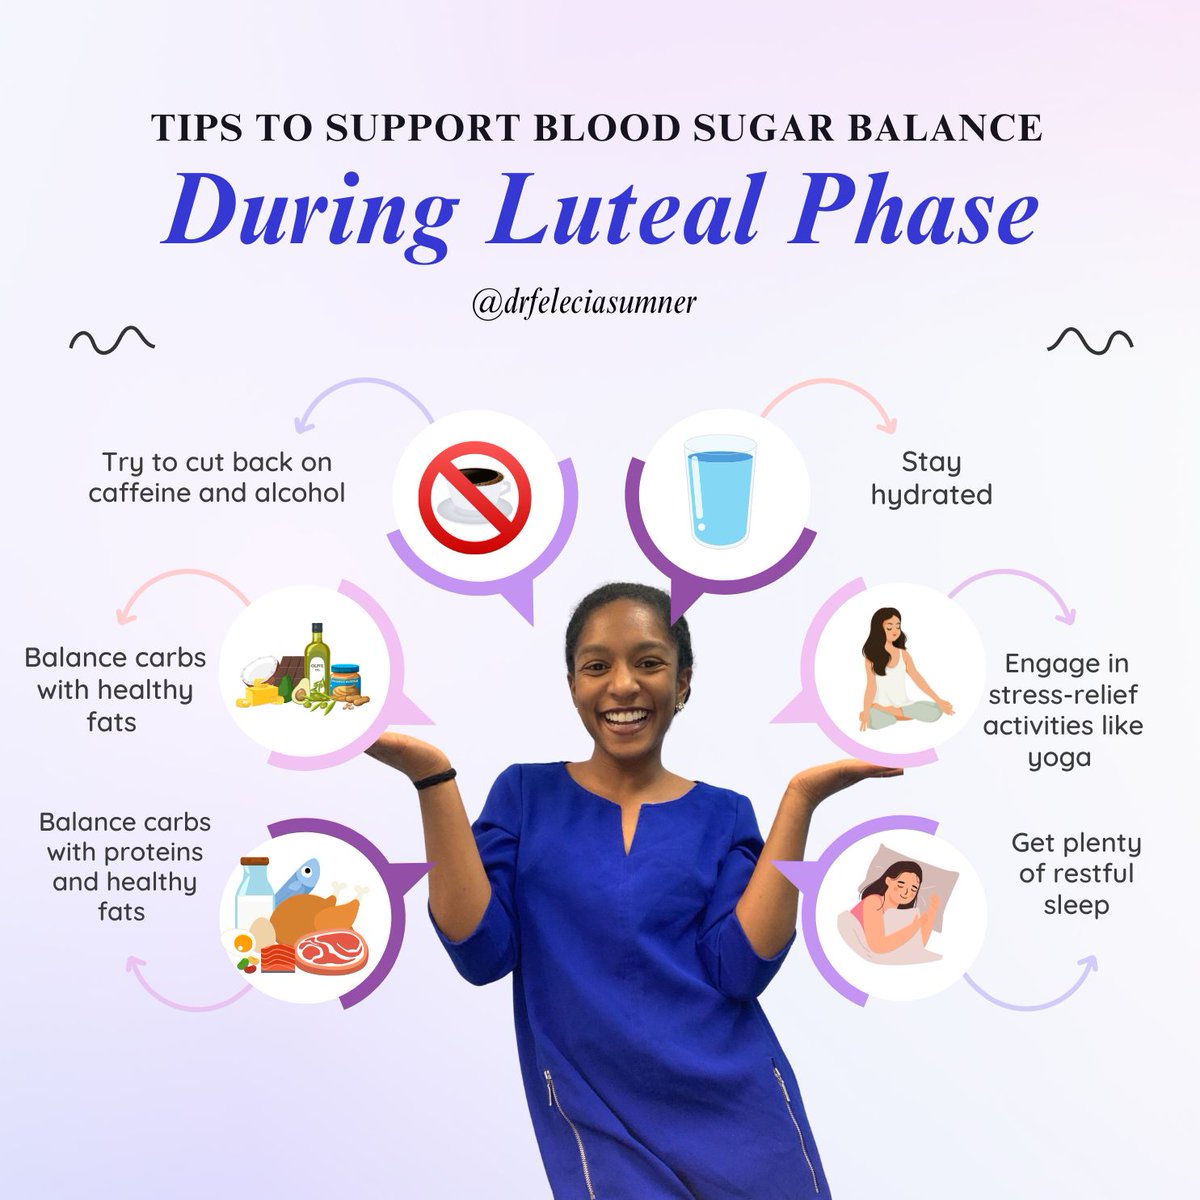 Curious to see how balancing your blood sugar might ease your PMS symptoms? Give these tips a try and let me know how it goes!

Drop a comment with the tip you’re trying this week! 💪

#BloodSugarBalance #PMSRelief #HormonalHealth #FunctionalMedicine #HealthTips #WomenHealth